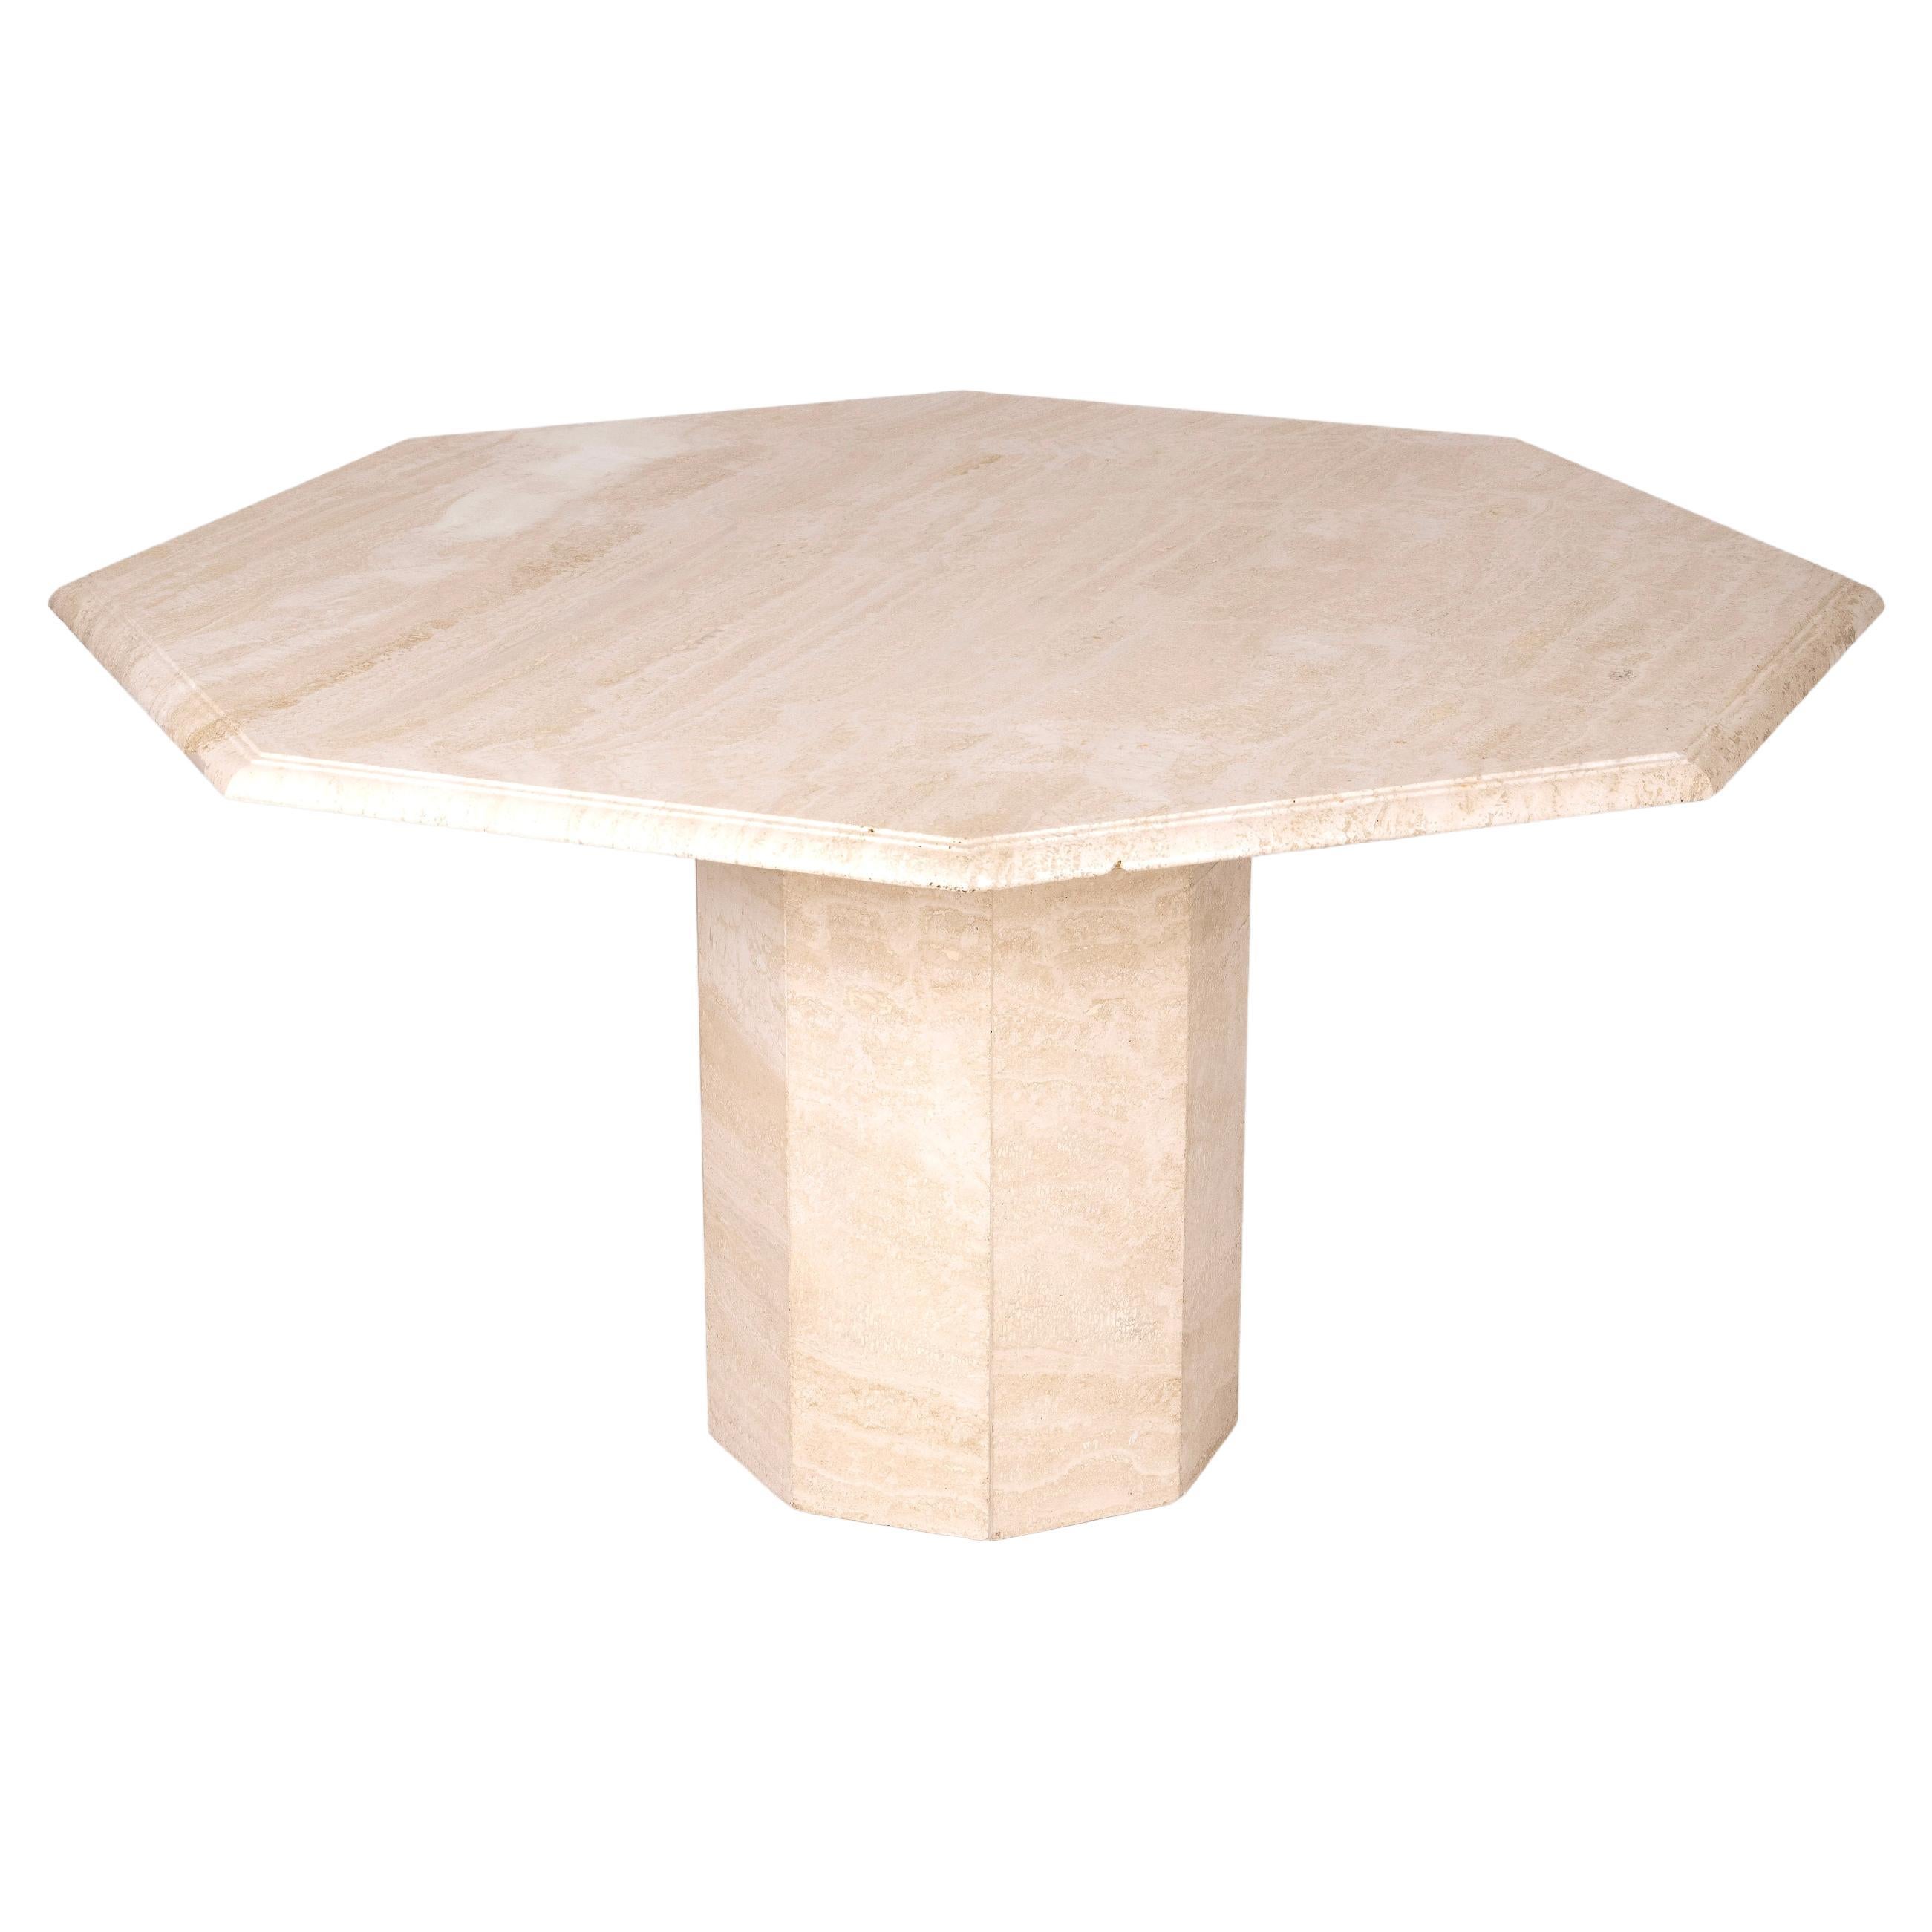 Octagonal travertine dining table. For Sale